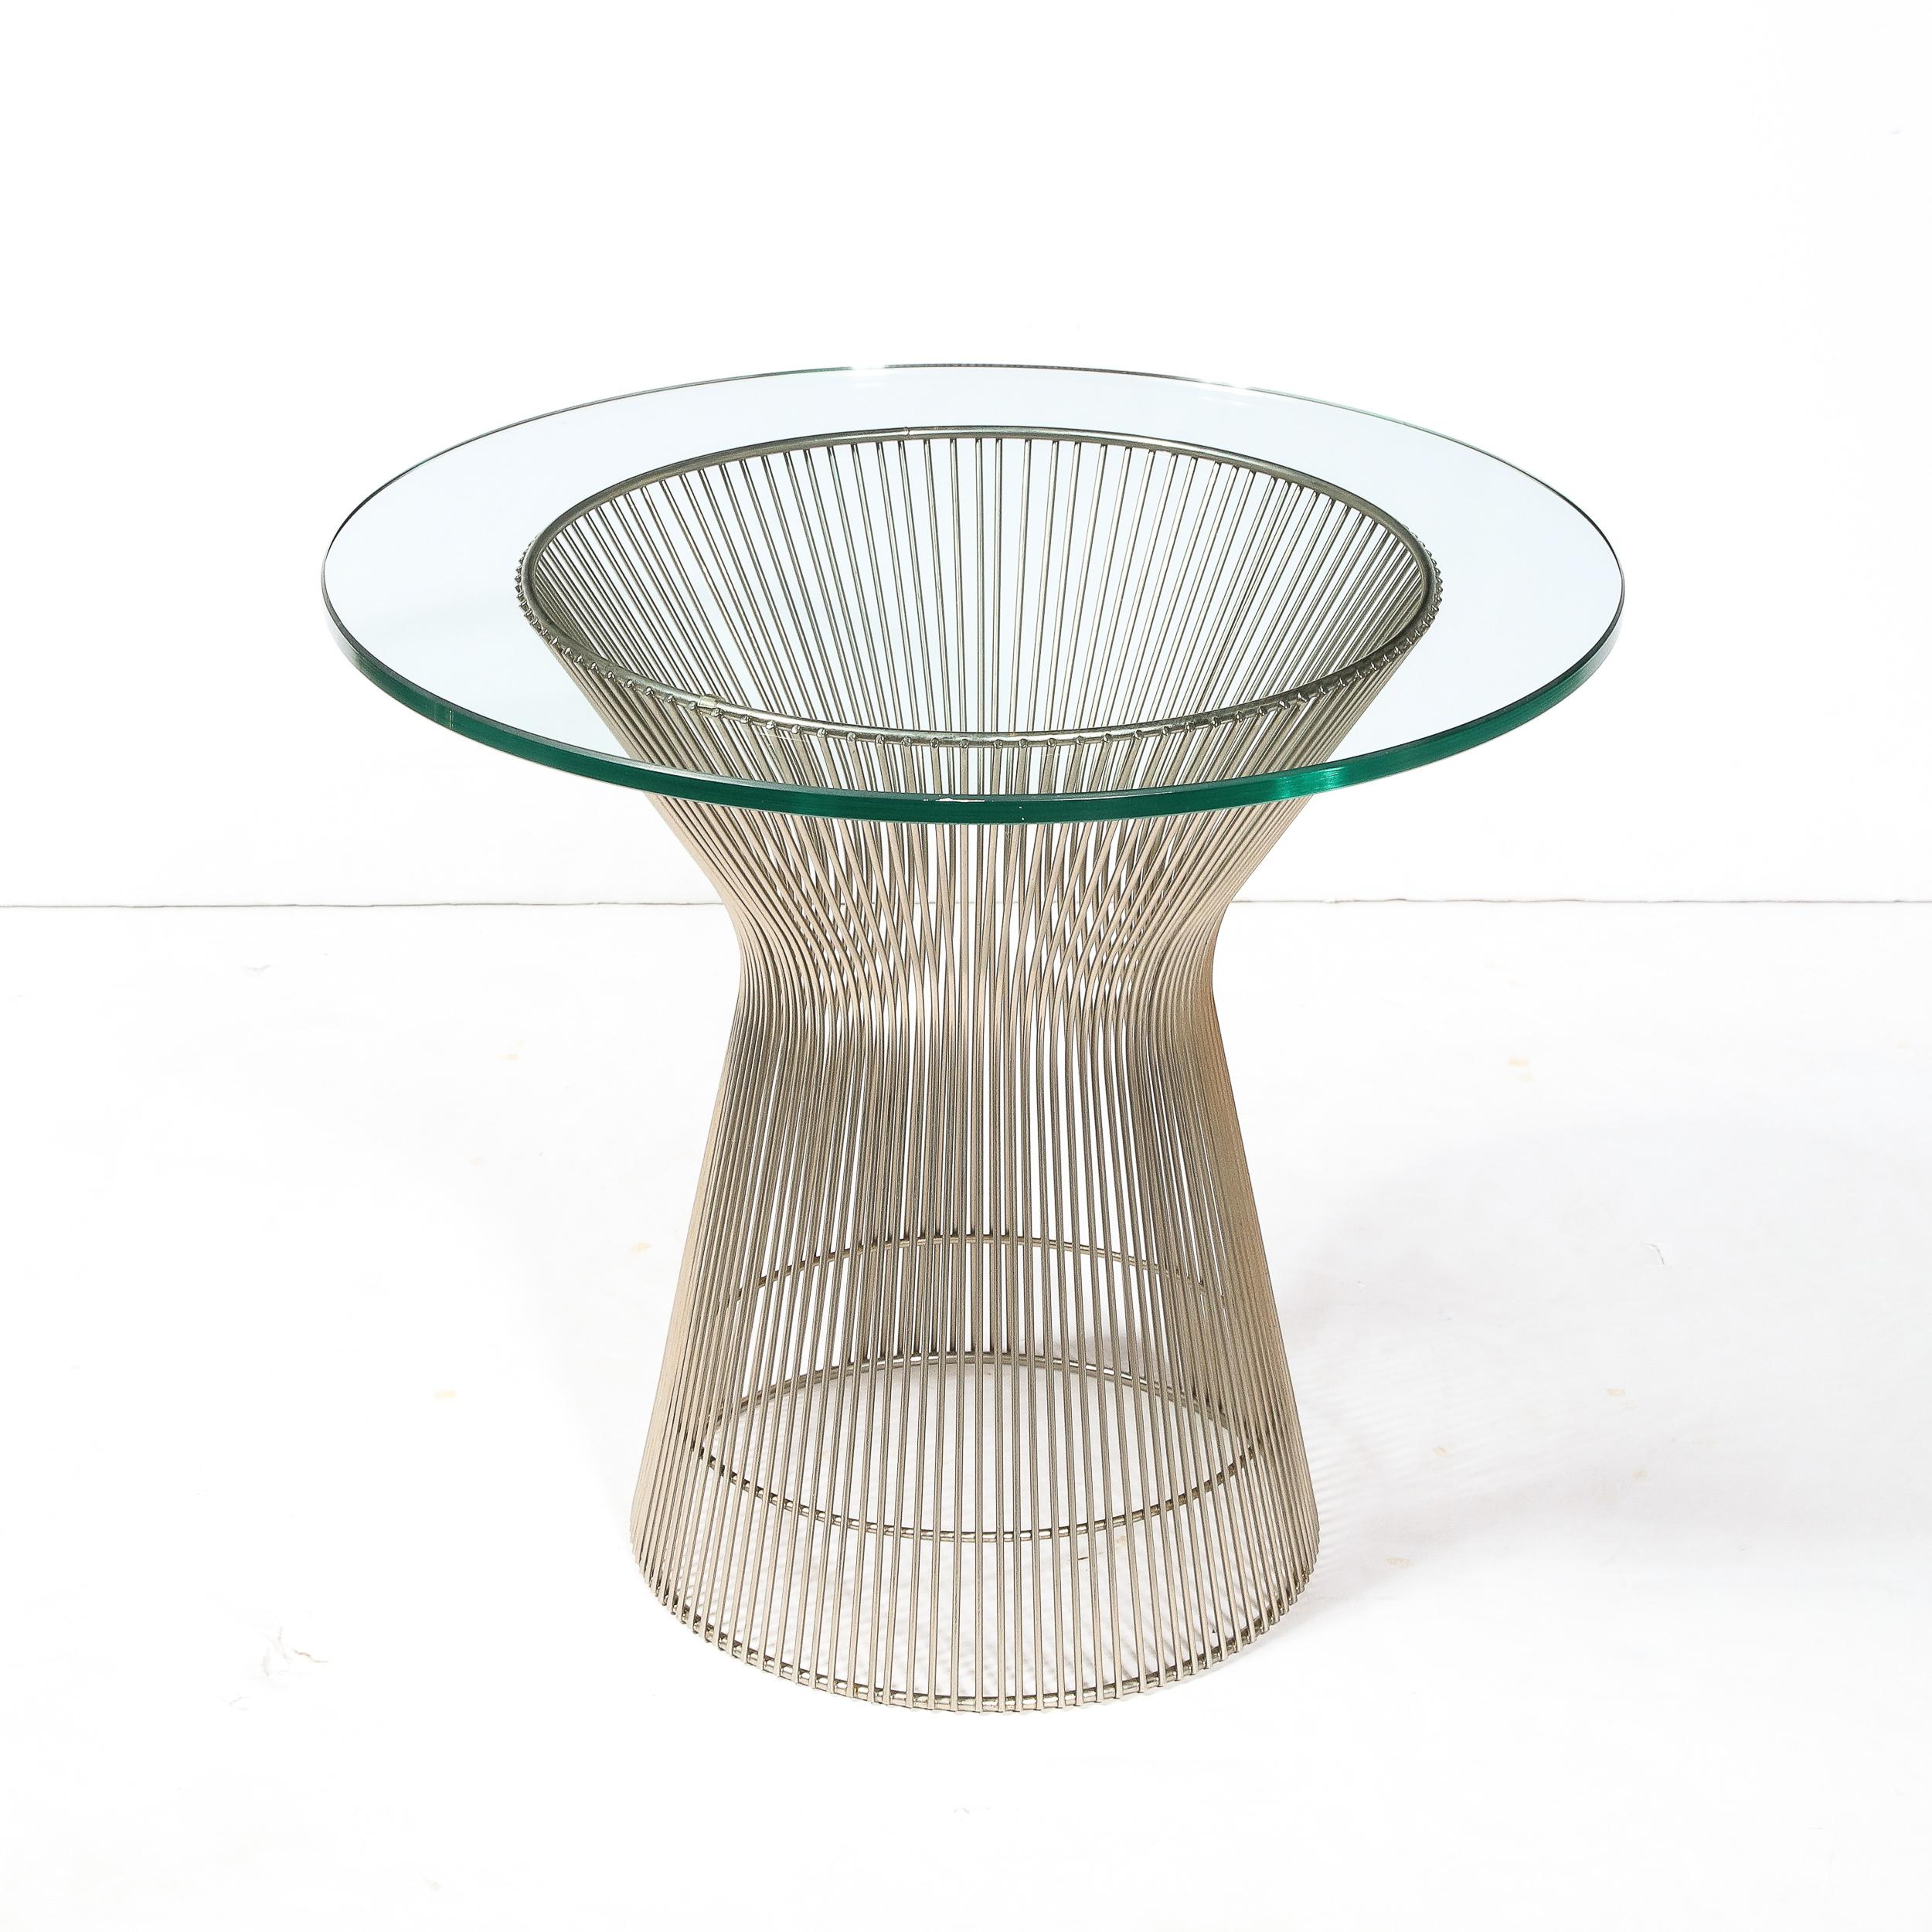 Pair of Mid-Century Modernist Polished Nickel Side Tables by Warren Platner For Sale 4